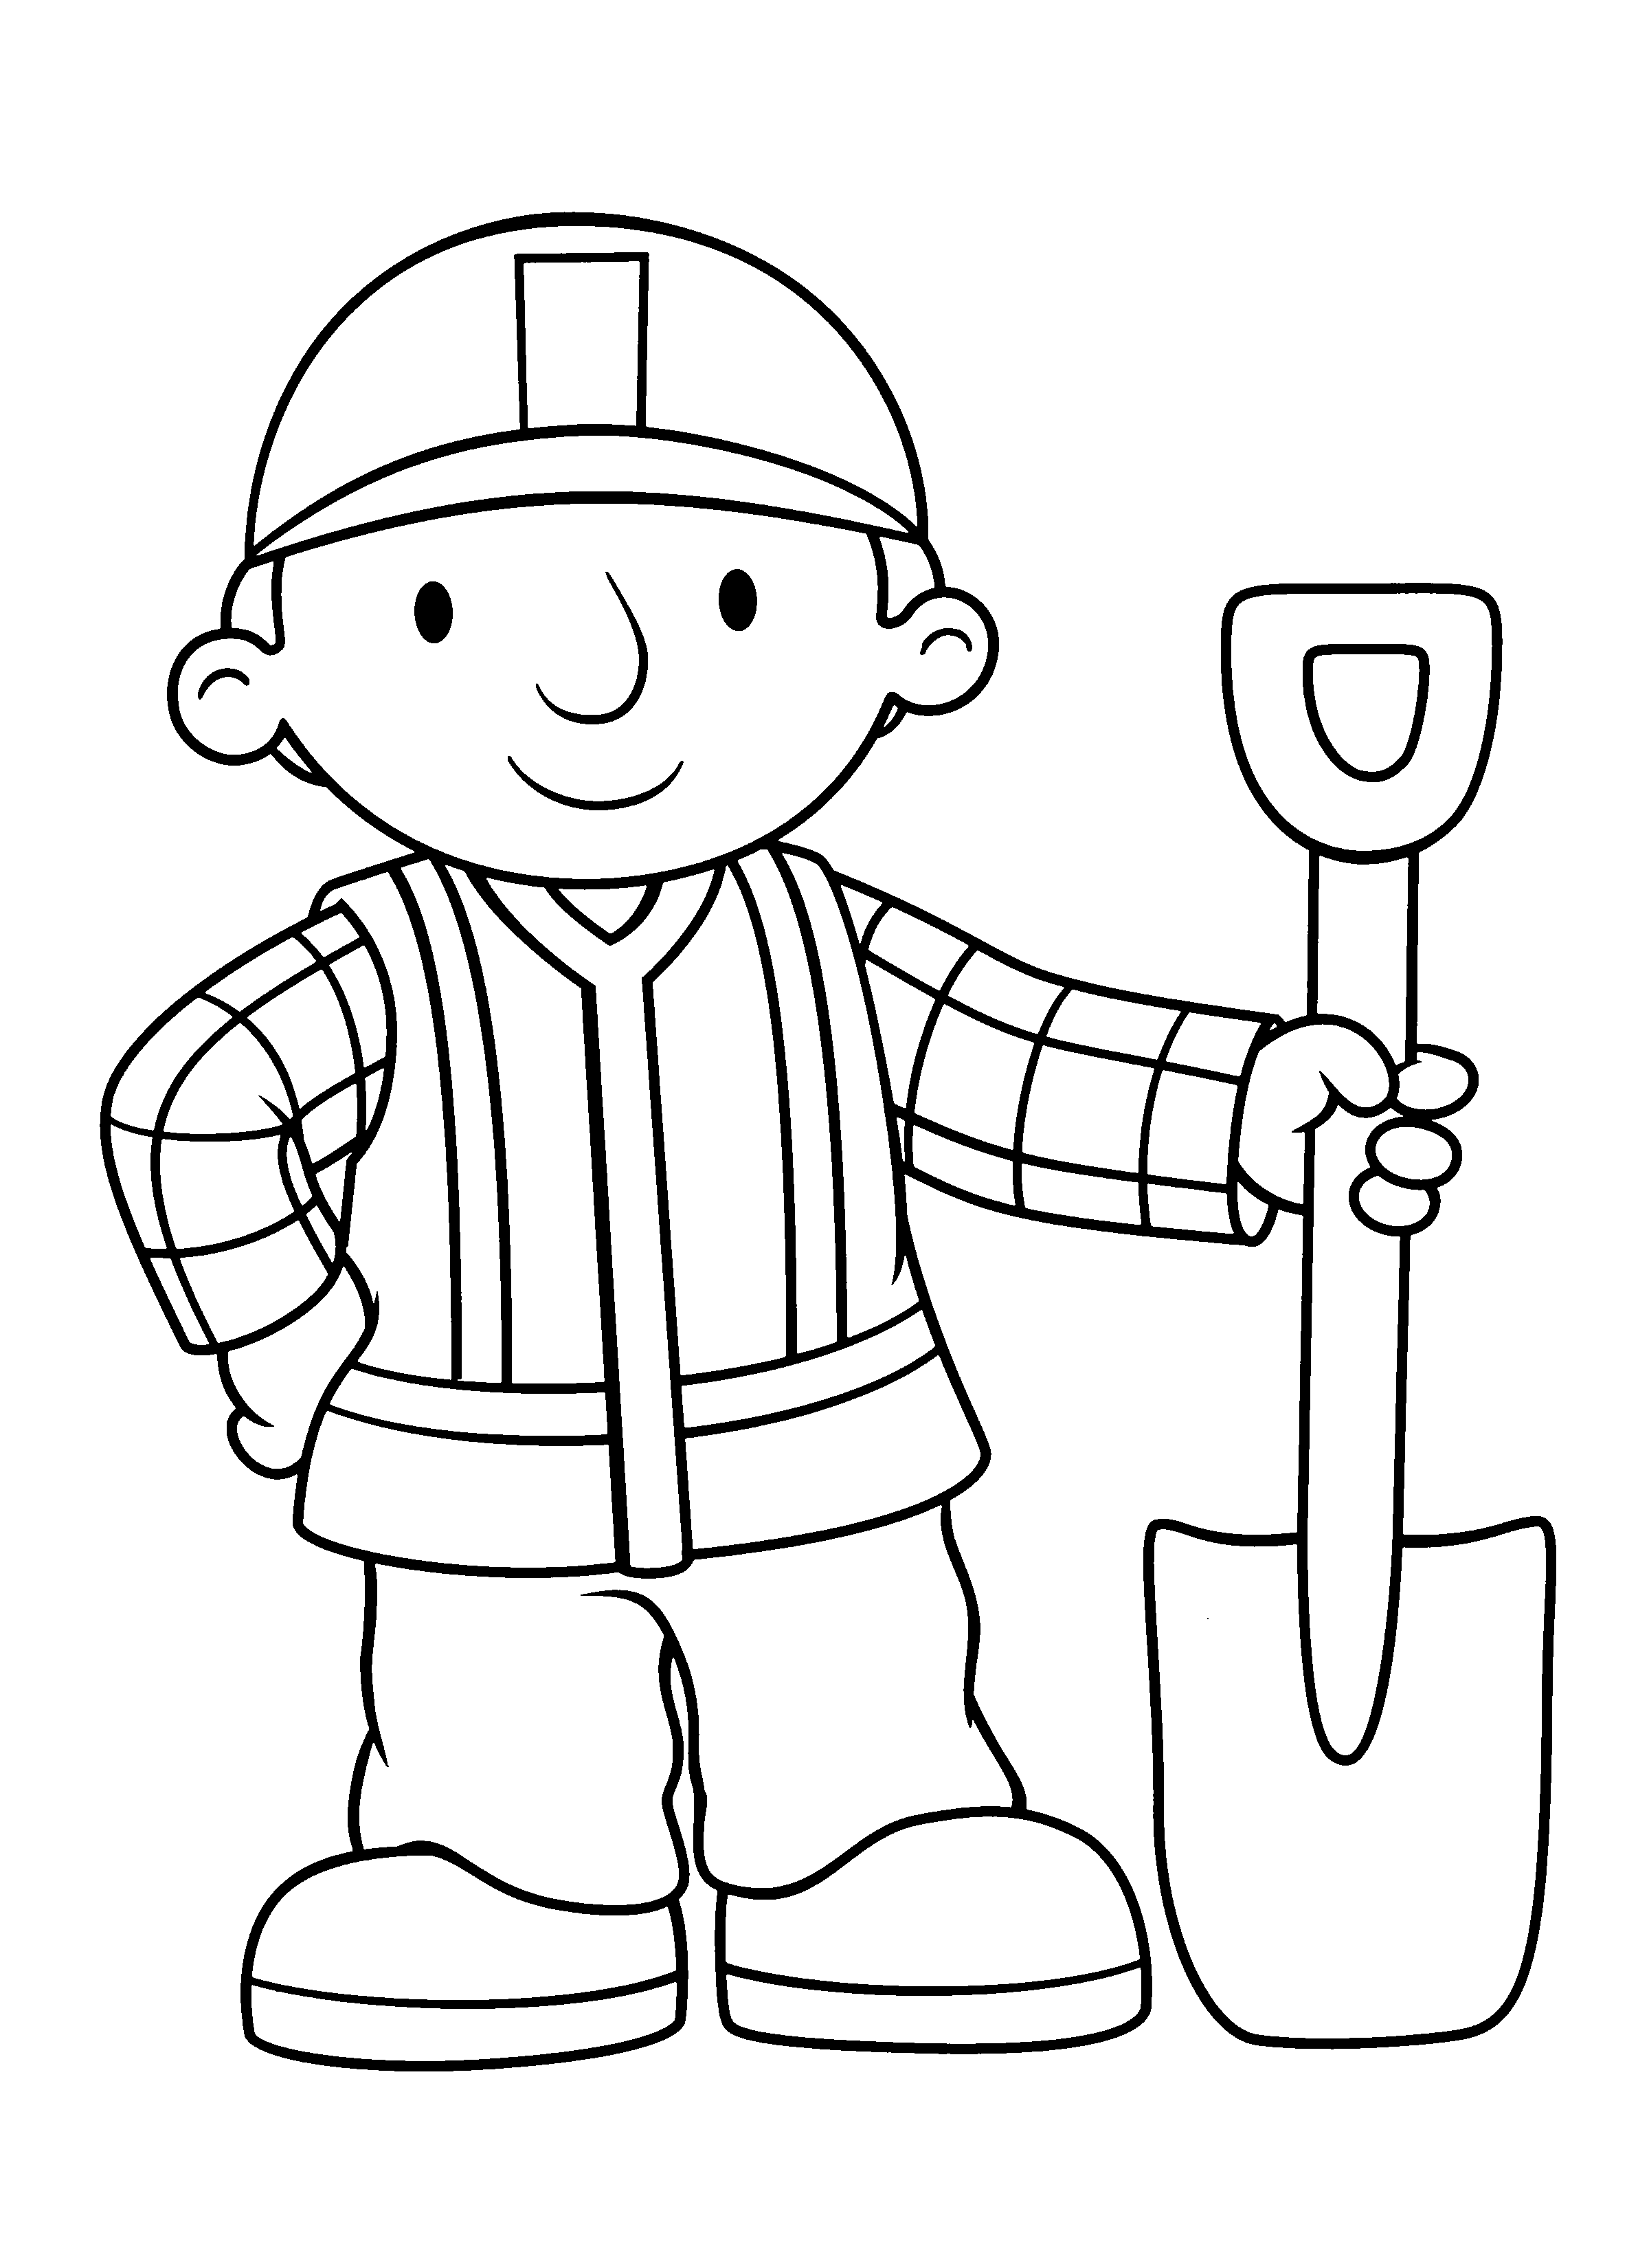 bob the builder coloring coloring page bob the builder coloring pages 2 the coloring bob builder 